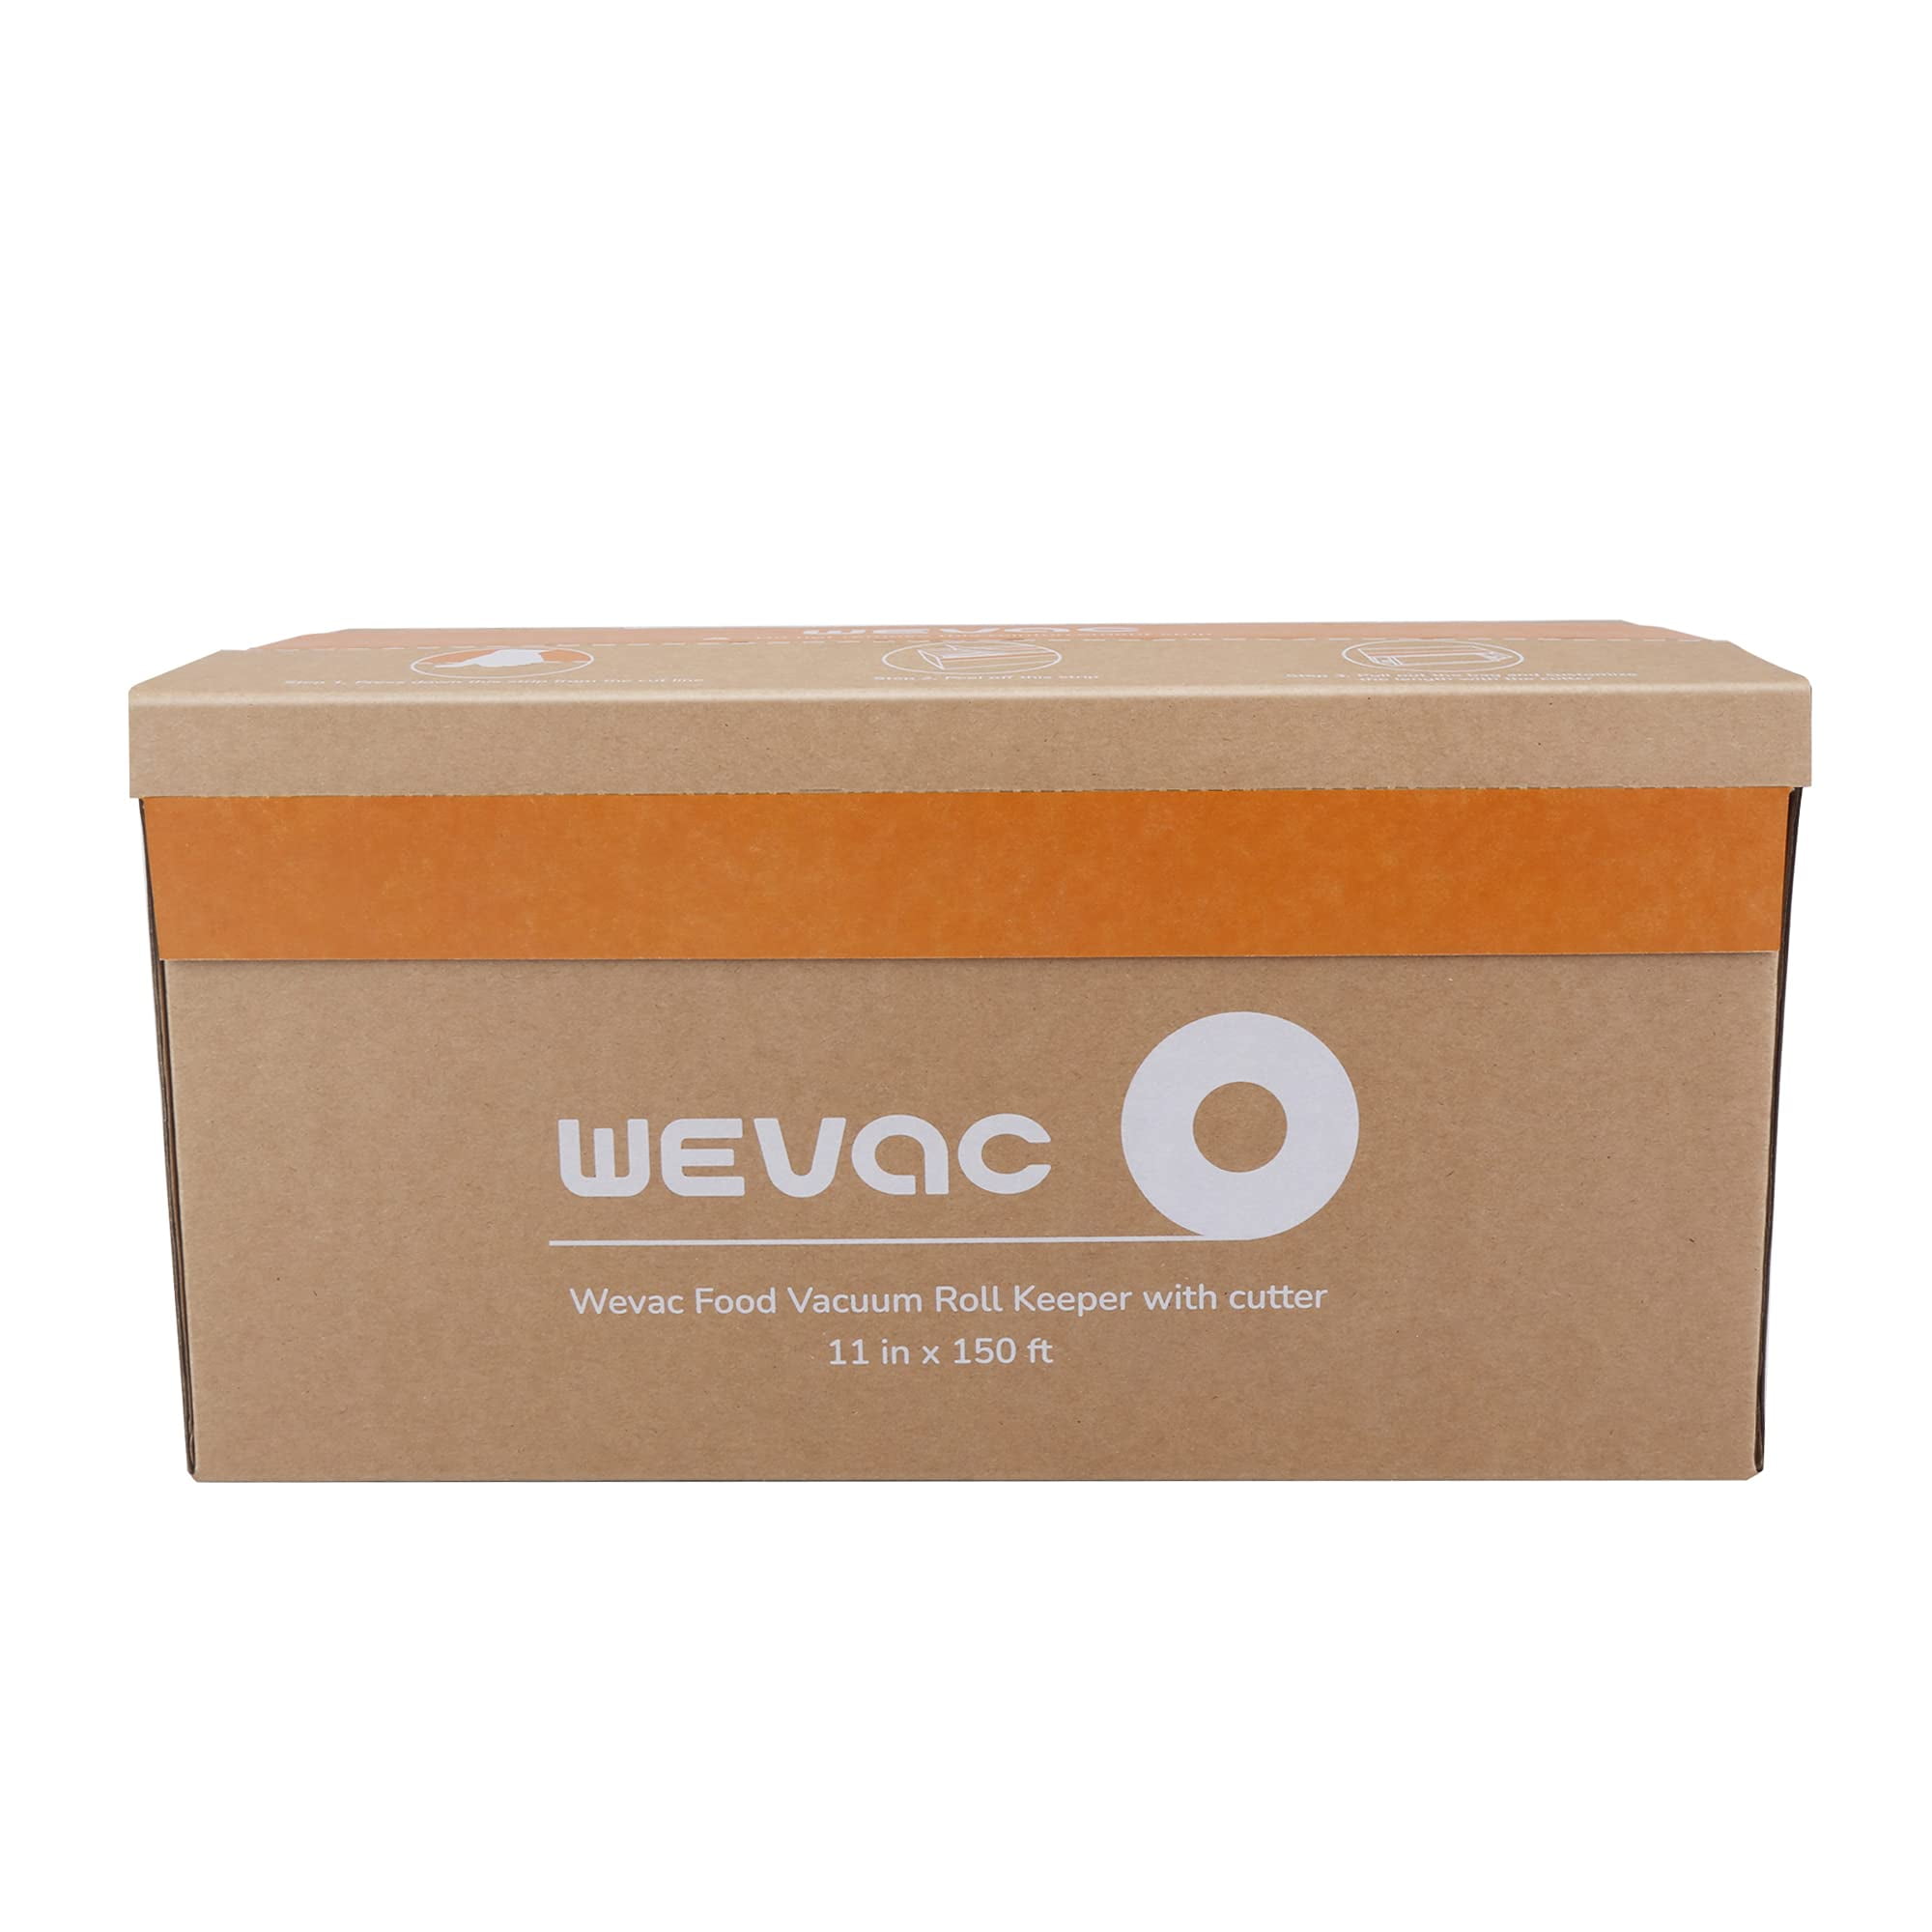 Wevac Vacuum Sealer Bags 8x50 Rolls 2 pack for Food Saver, Seal a Meal,  Weston. Commercial Grade, BPA Free, Heavy Duty, Great for vac storage, Meal